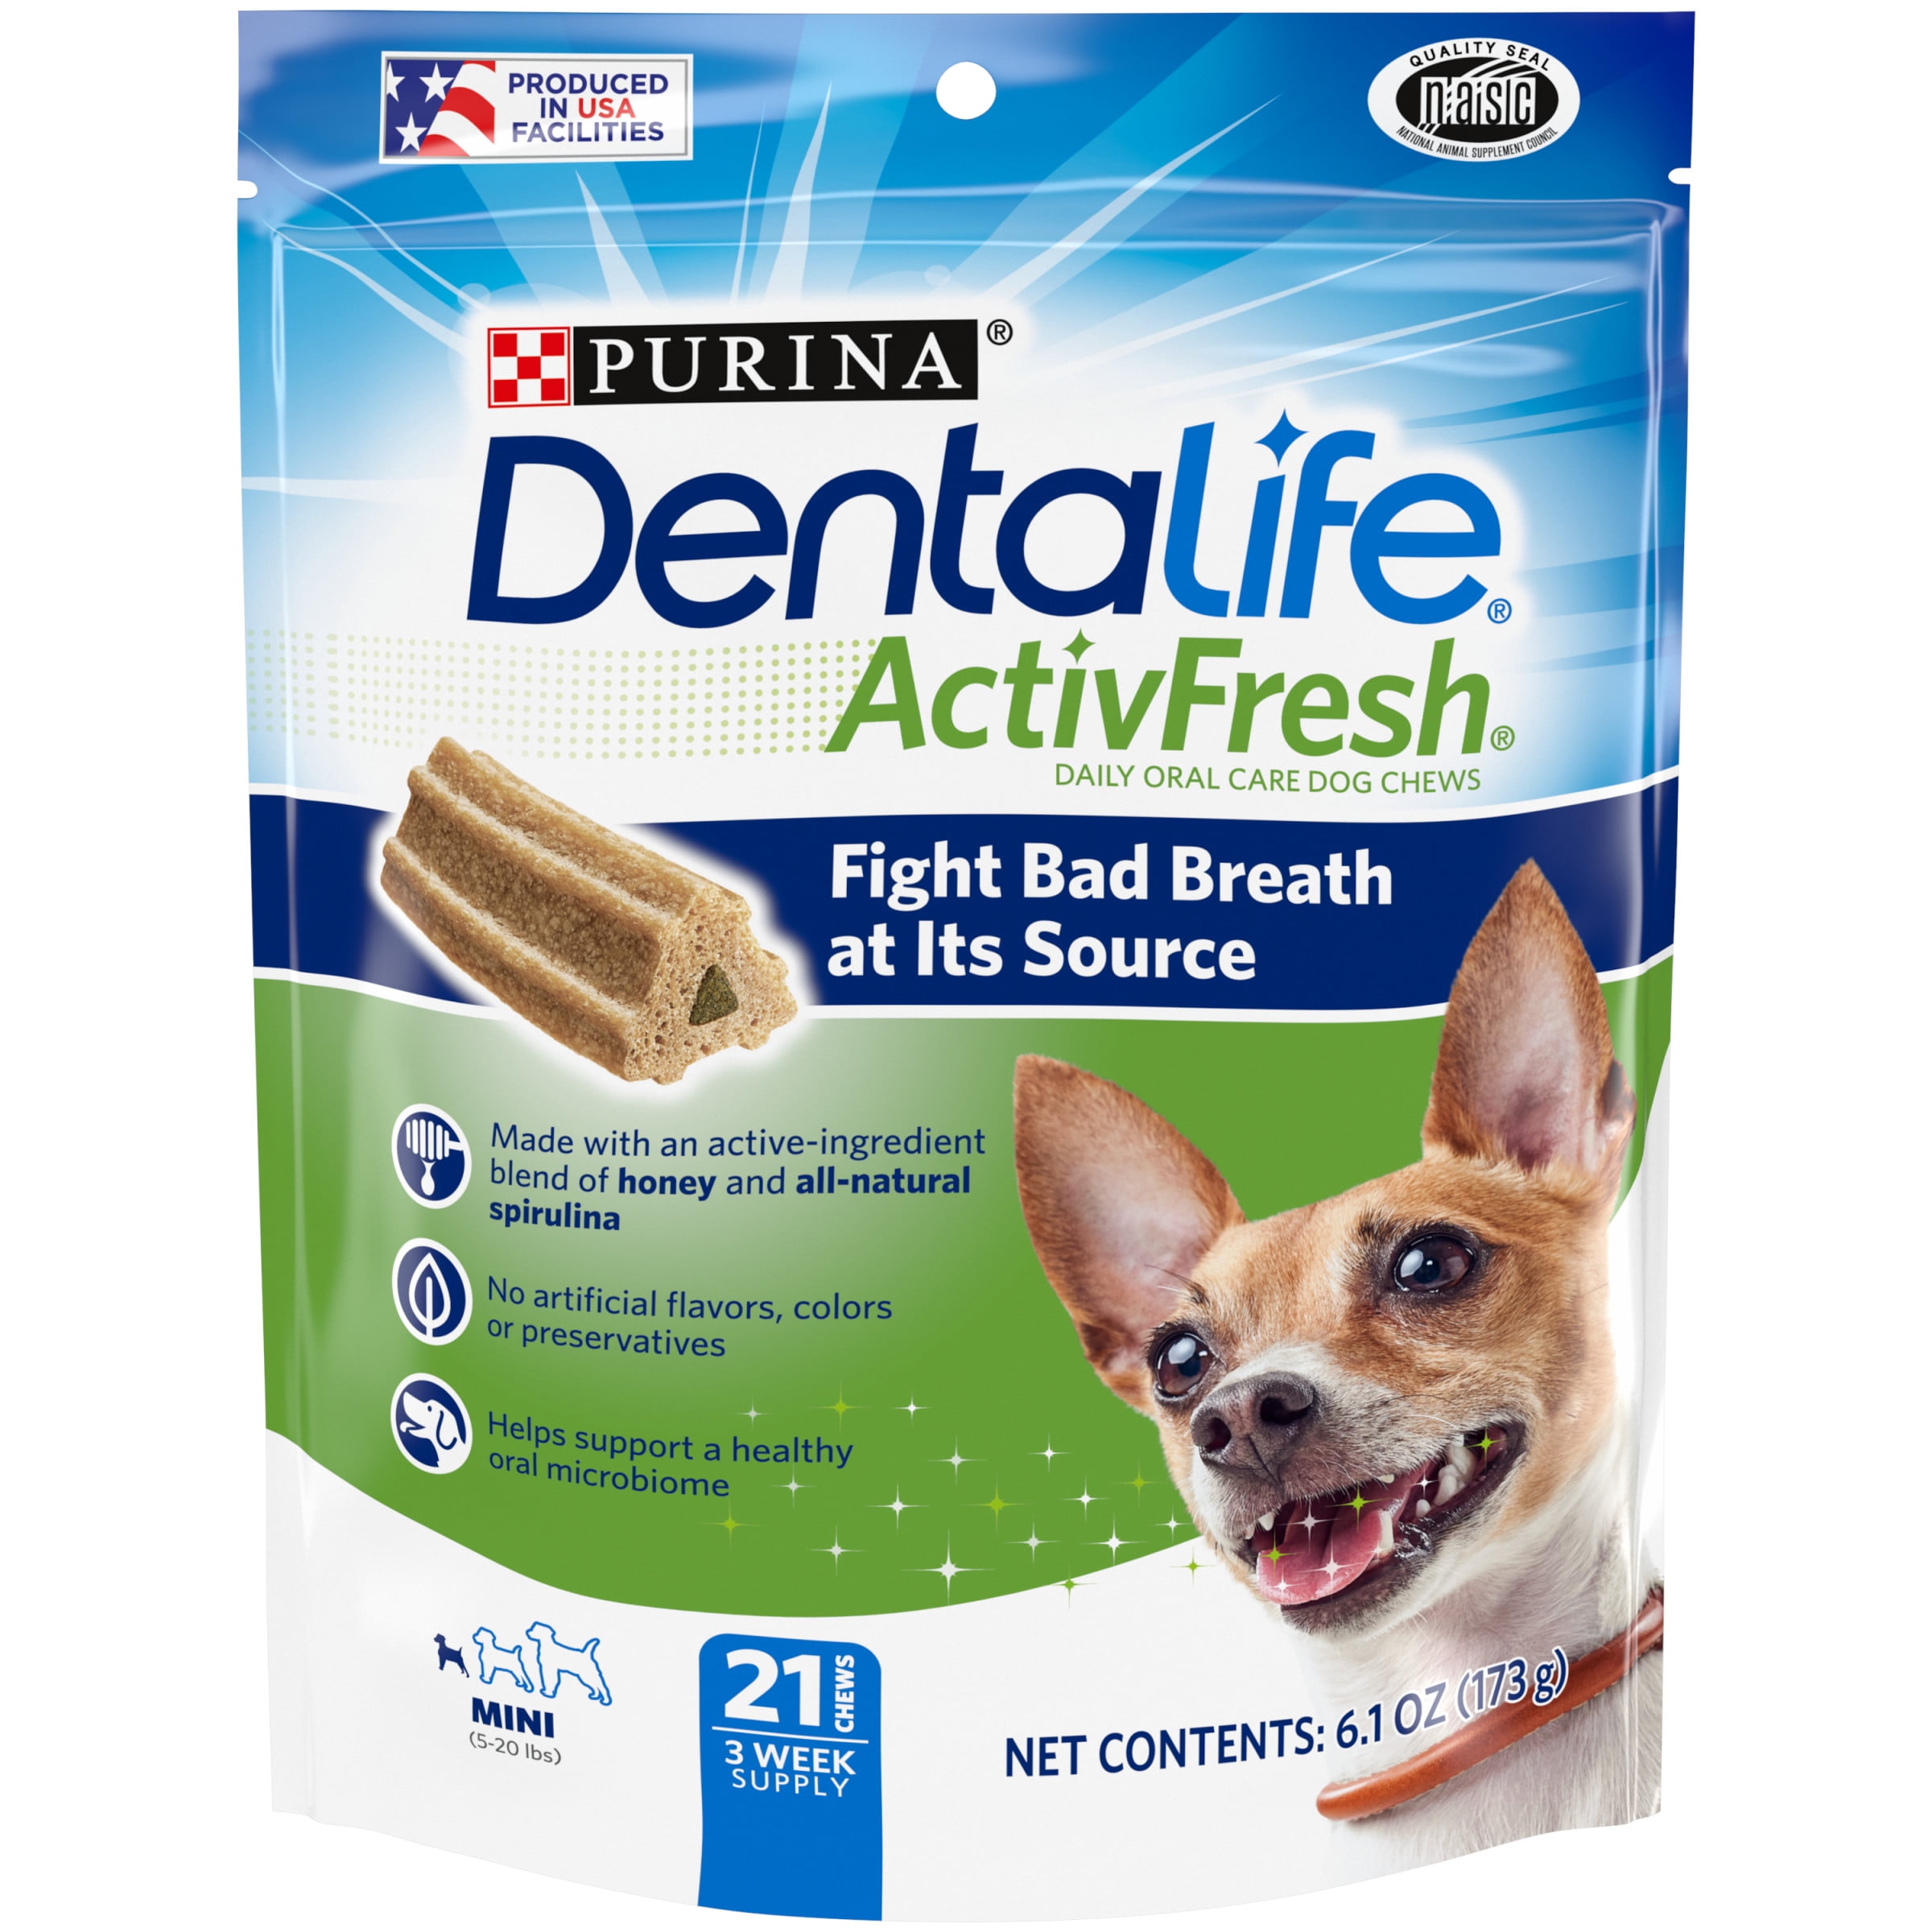 Purina DentaLife Dental Treats Variety Pack for Dogs, 6.1 oz Pouches (4 Pack)